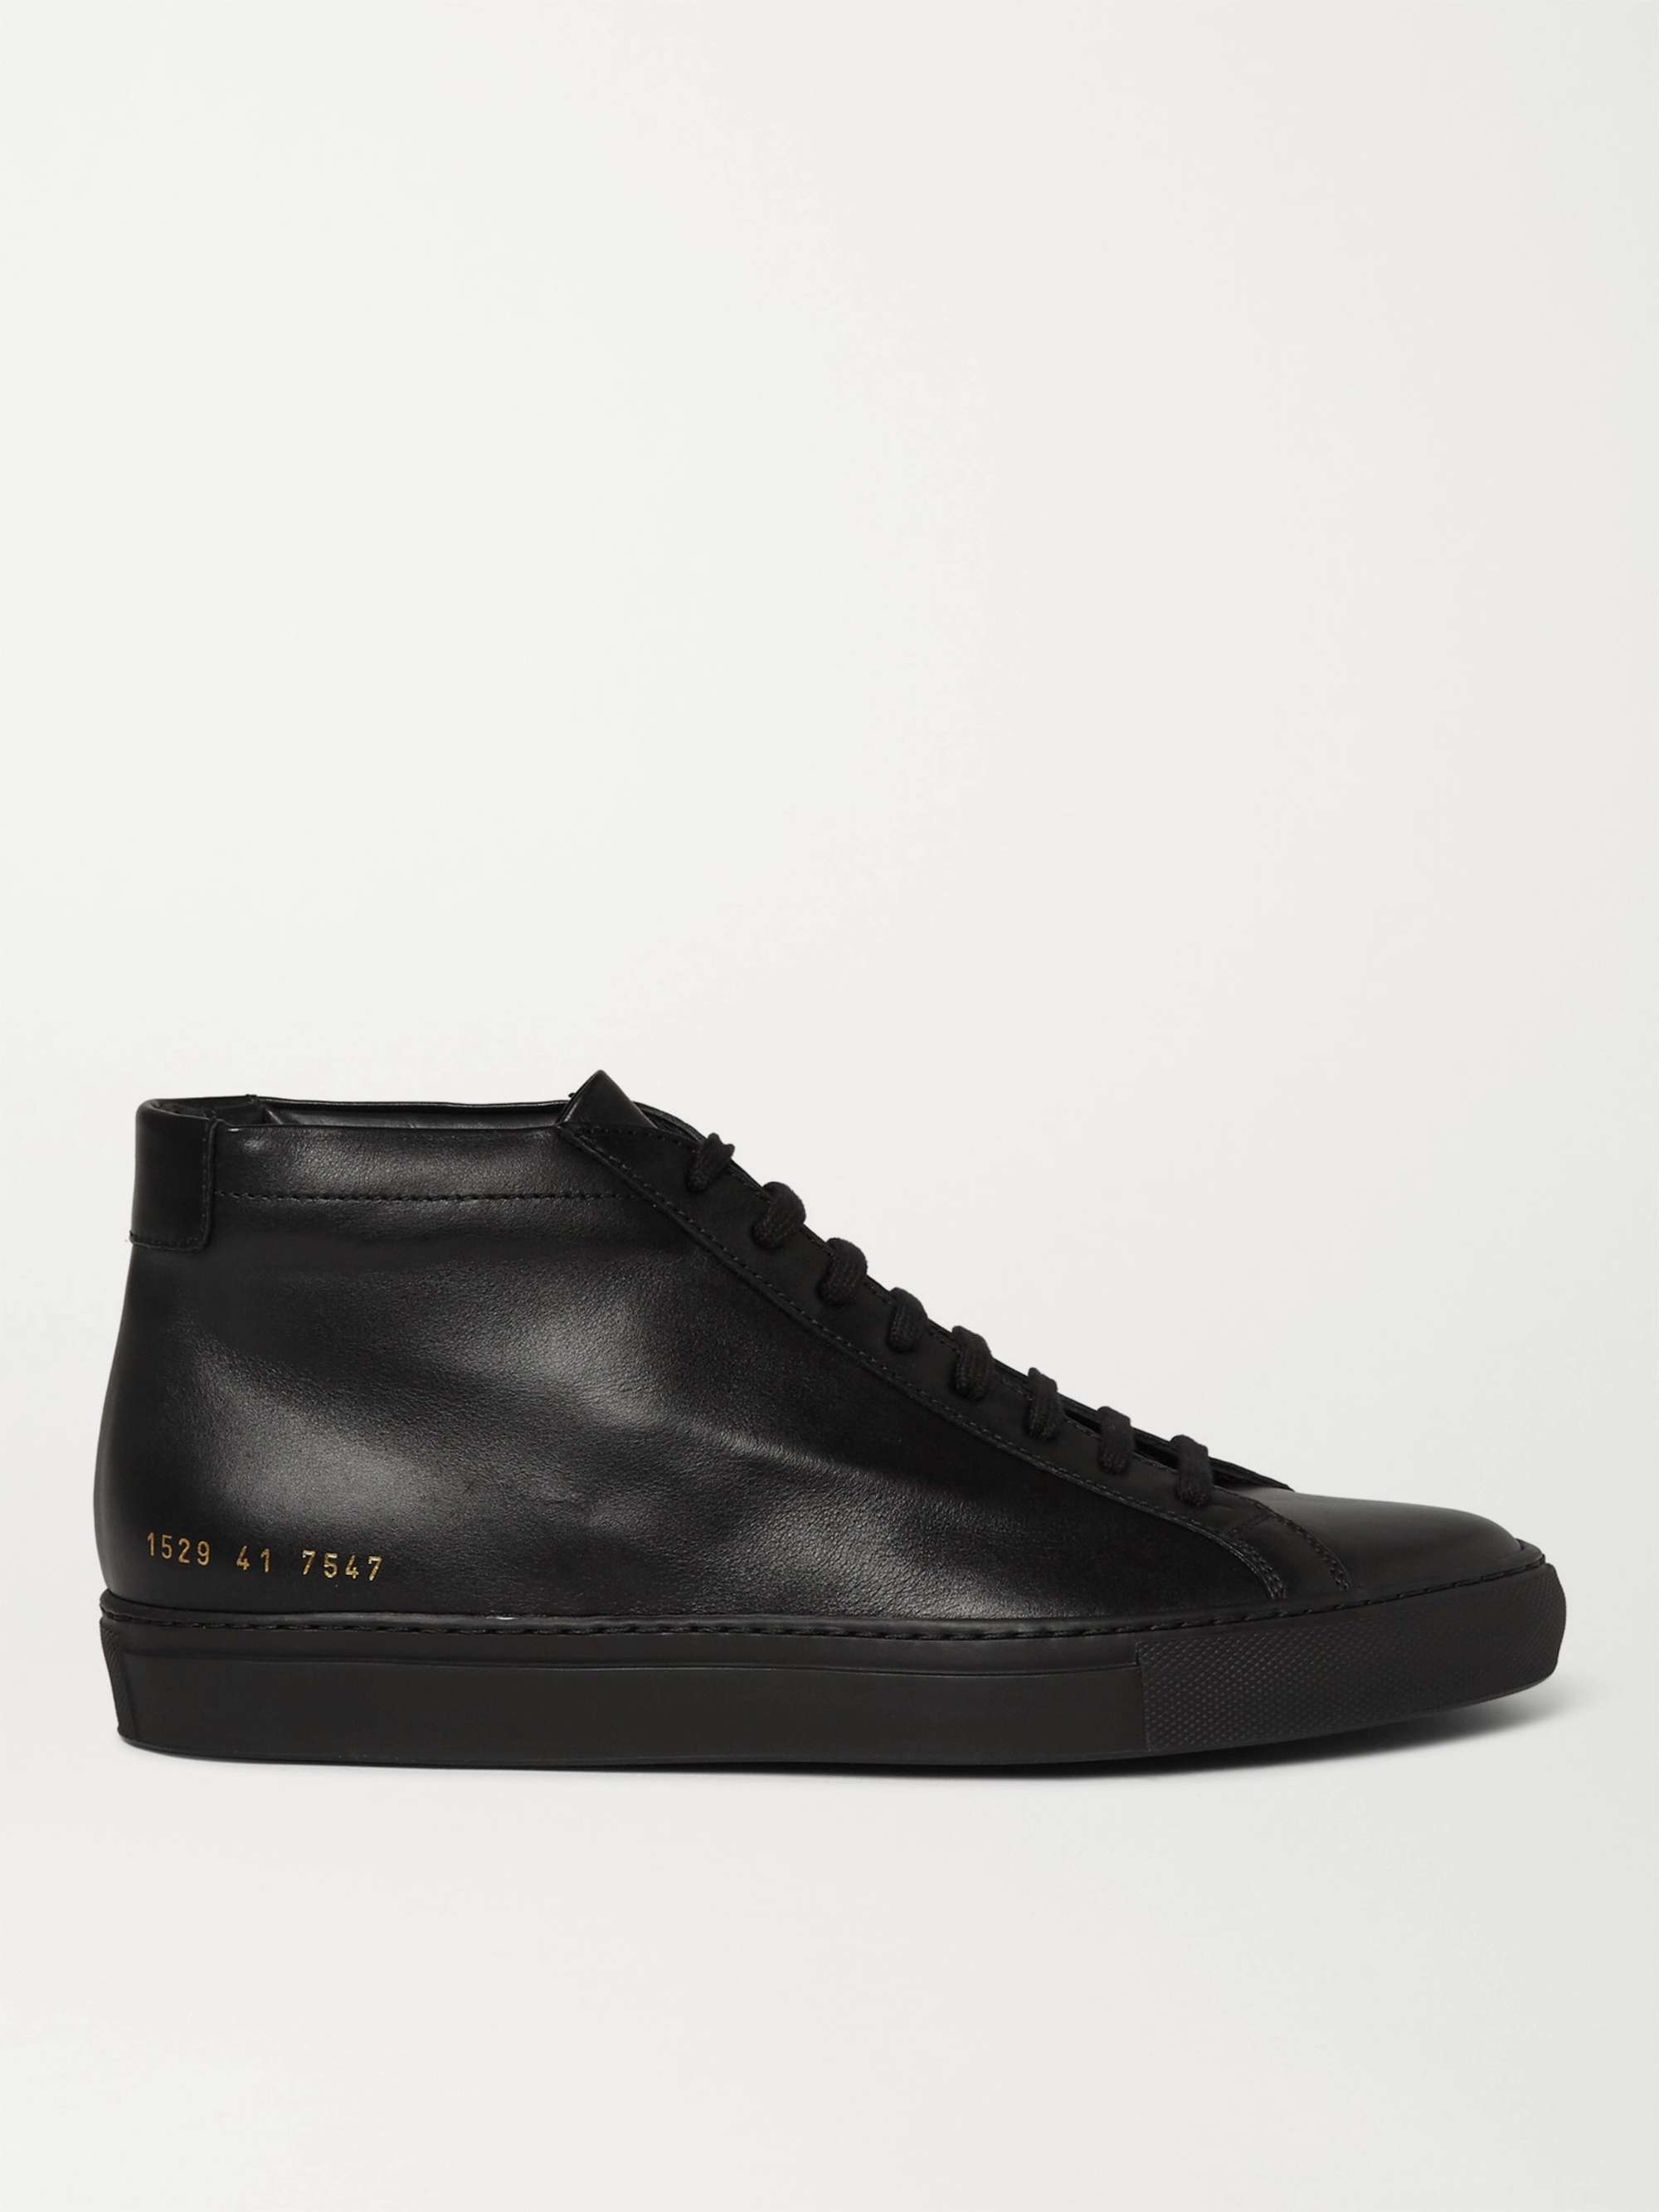 COMMON PROJECTS Original Achilles Leather High-Top Sneakers